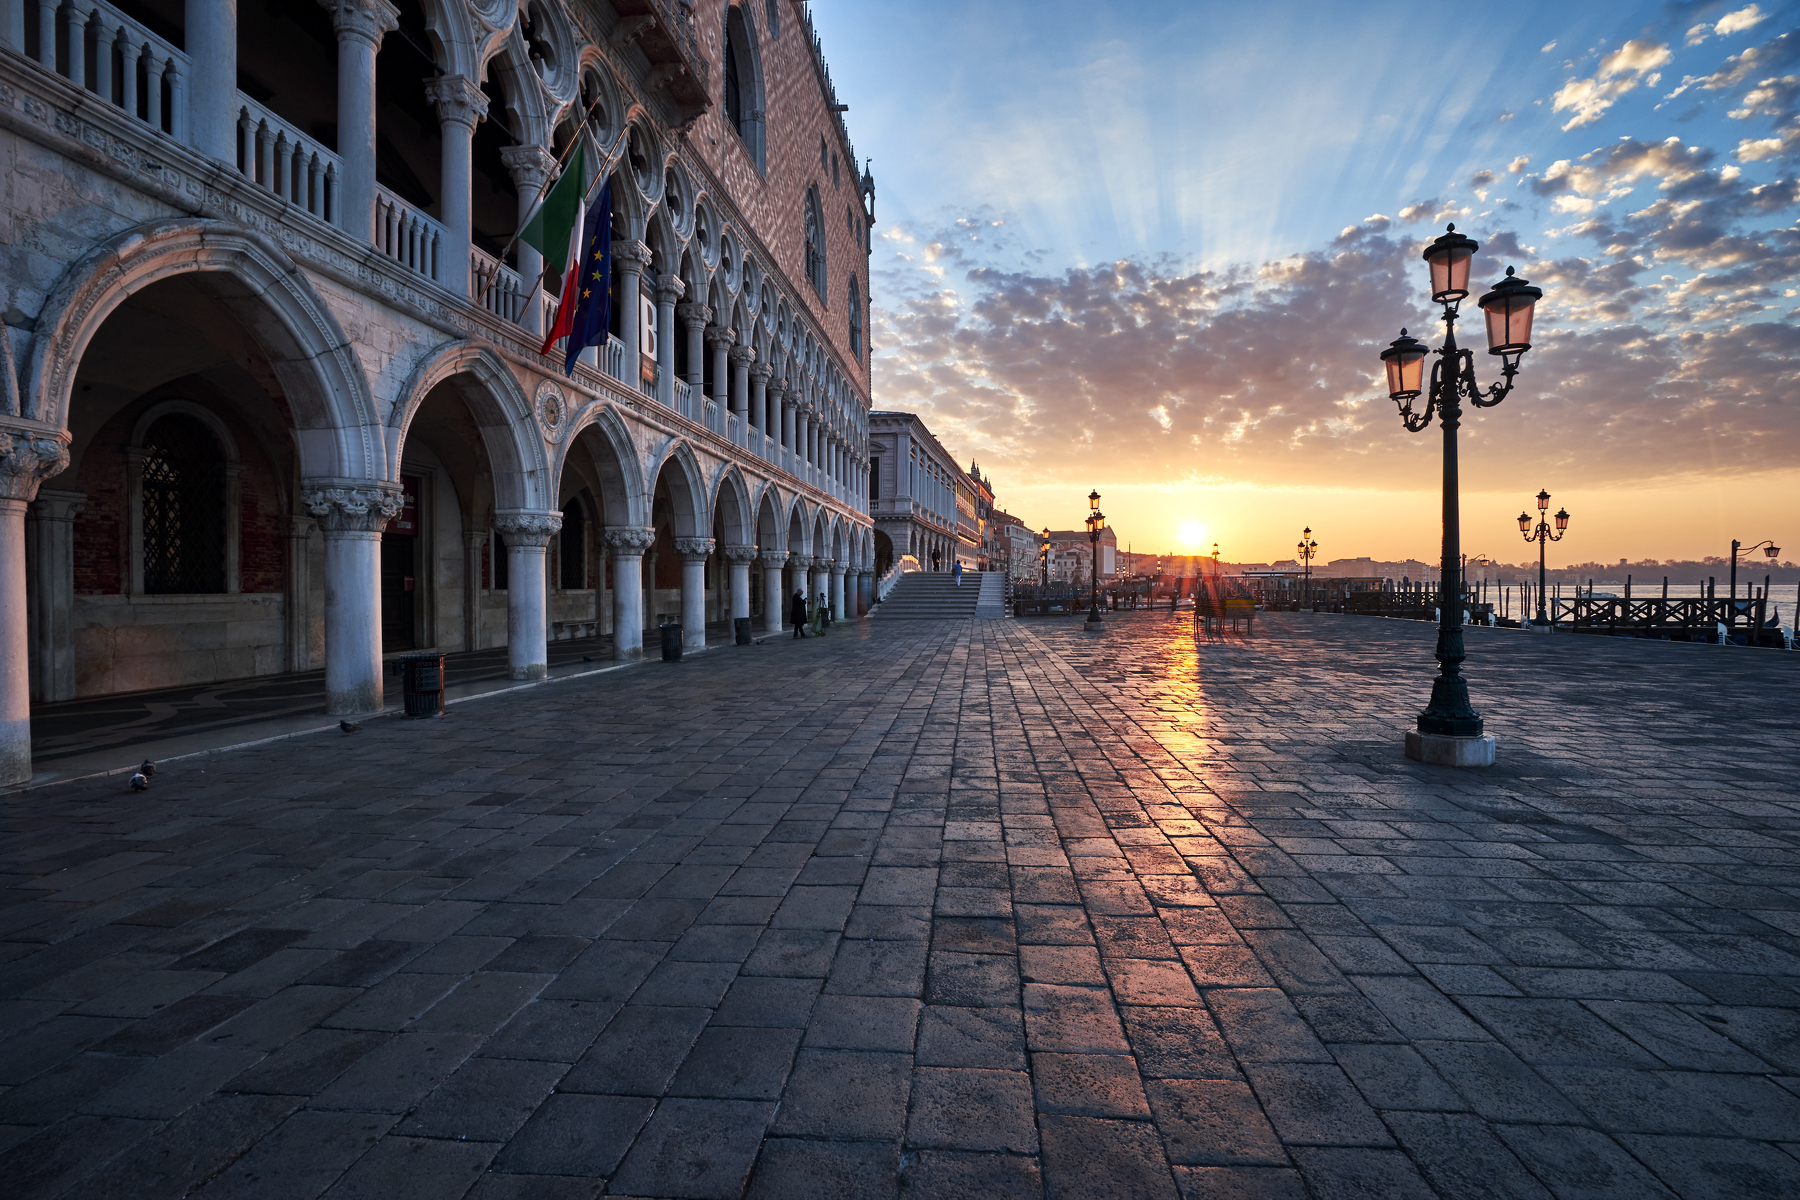 Architecture Building Arch Town Square Venice Italy Lamp Street Light Cobblestone Flag Old Building  1800x1200